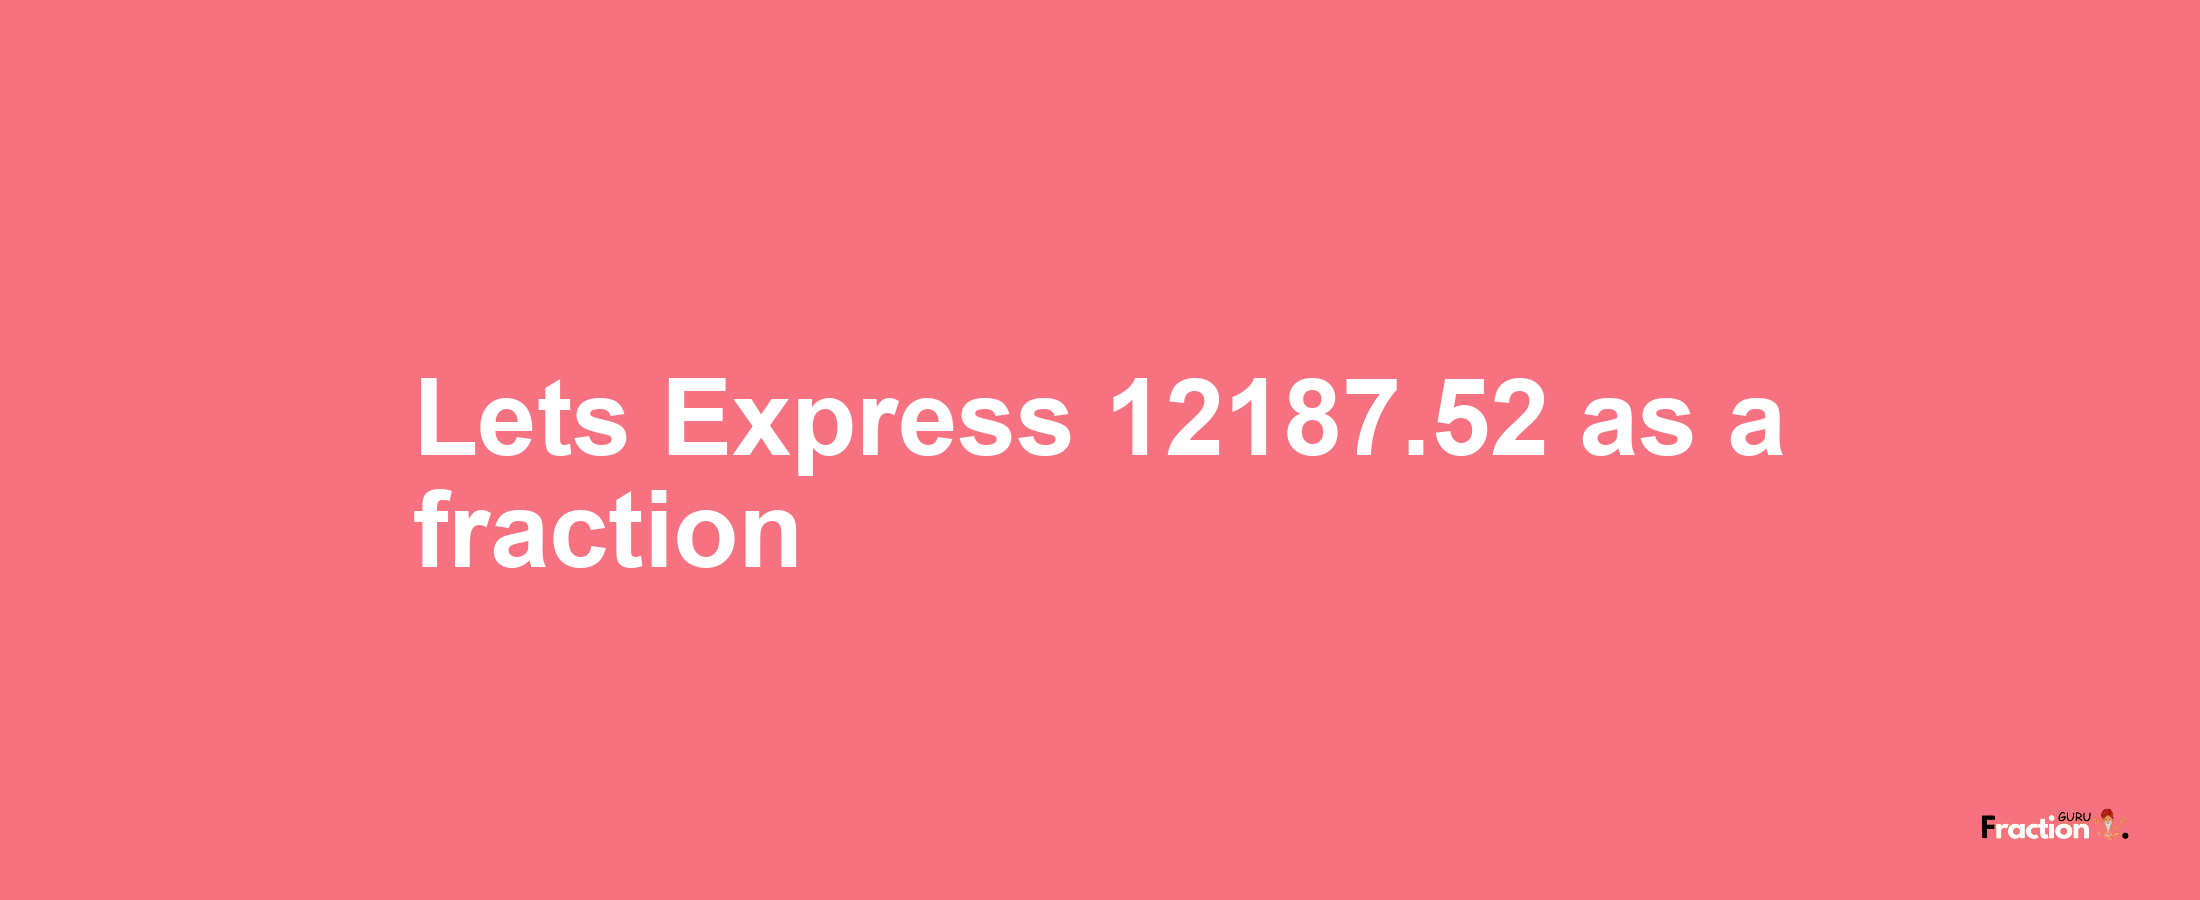 Lets Express 12187.52 as afraction